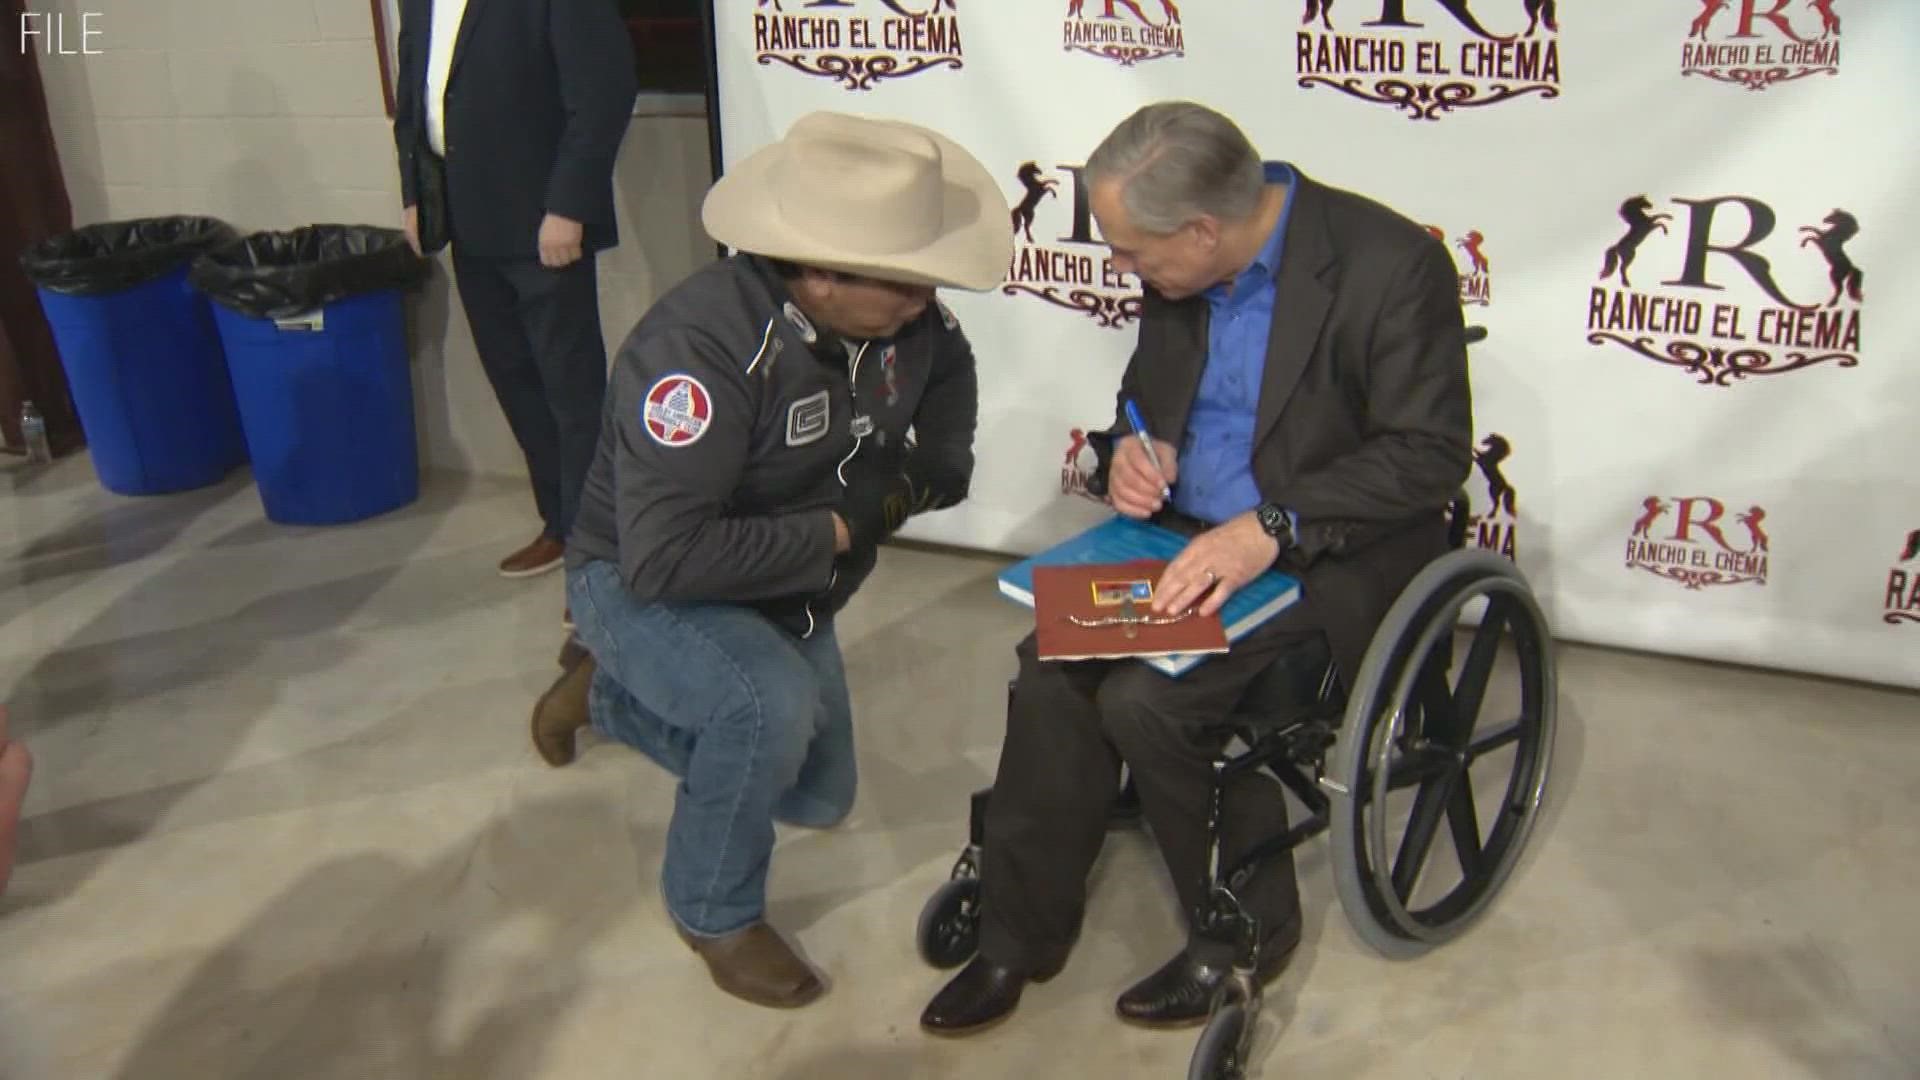 We're learning a series of flight records show Gov. Abbott spent more time fundraising, just hours after the shooting in Uvalde than he initially led on.